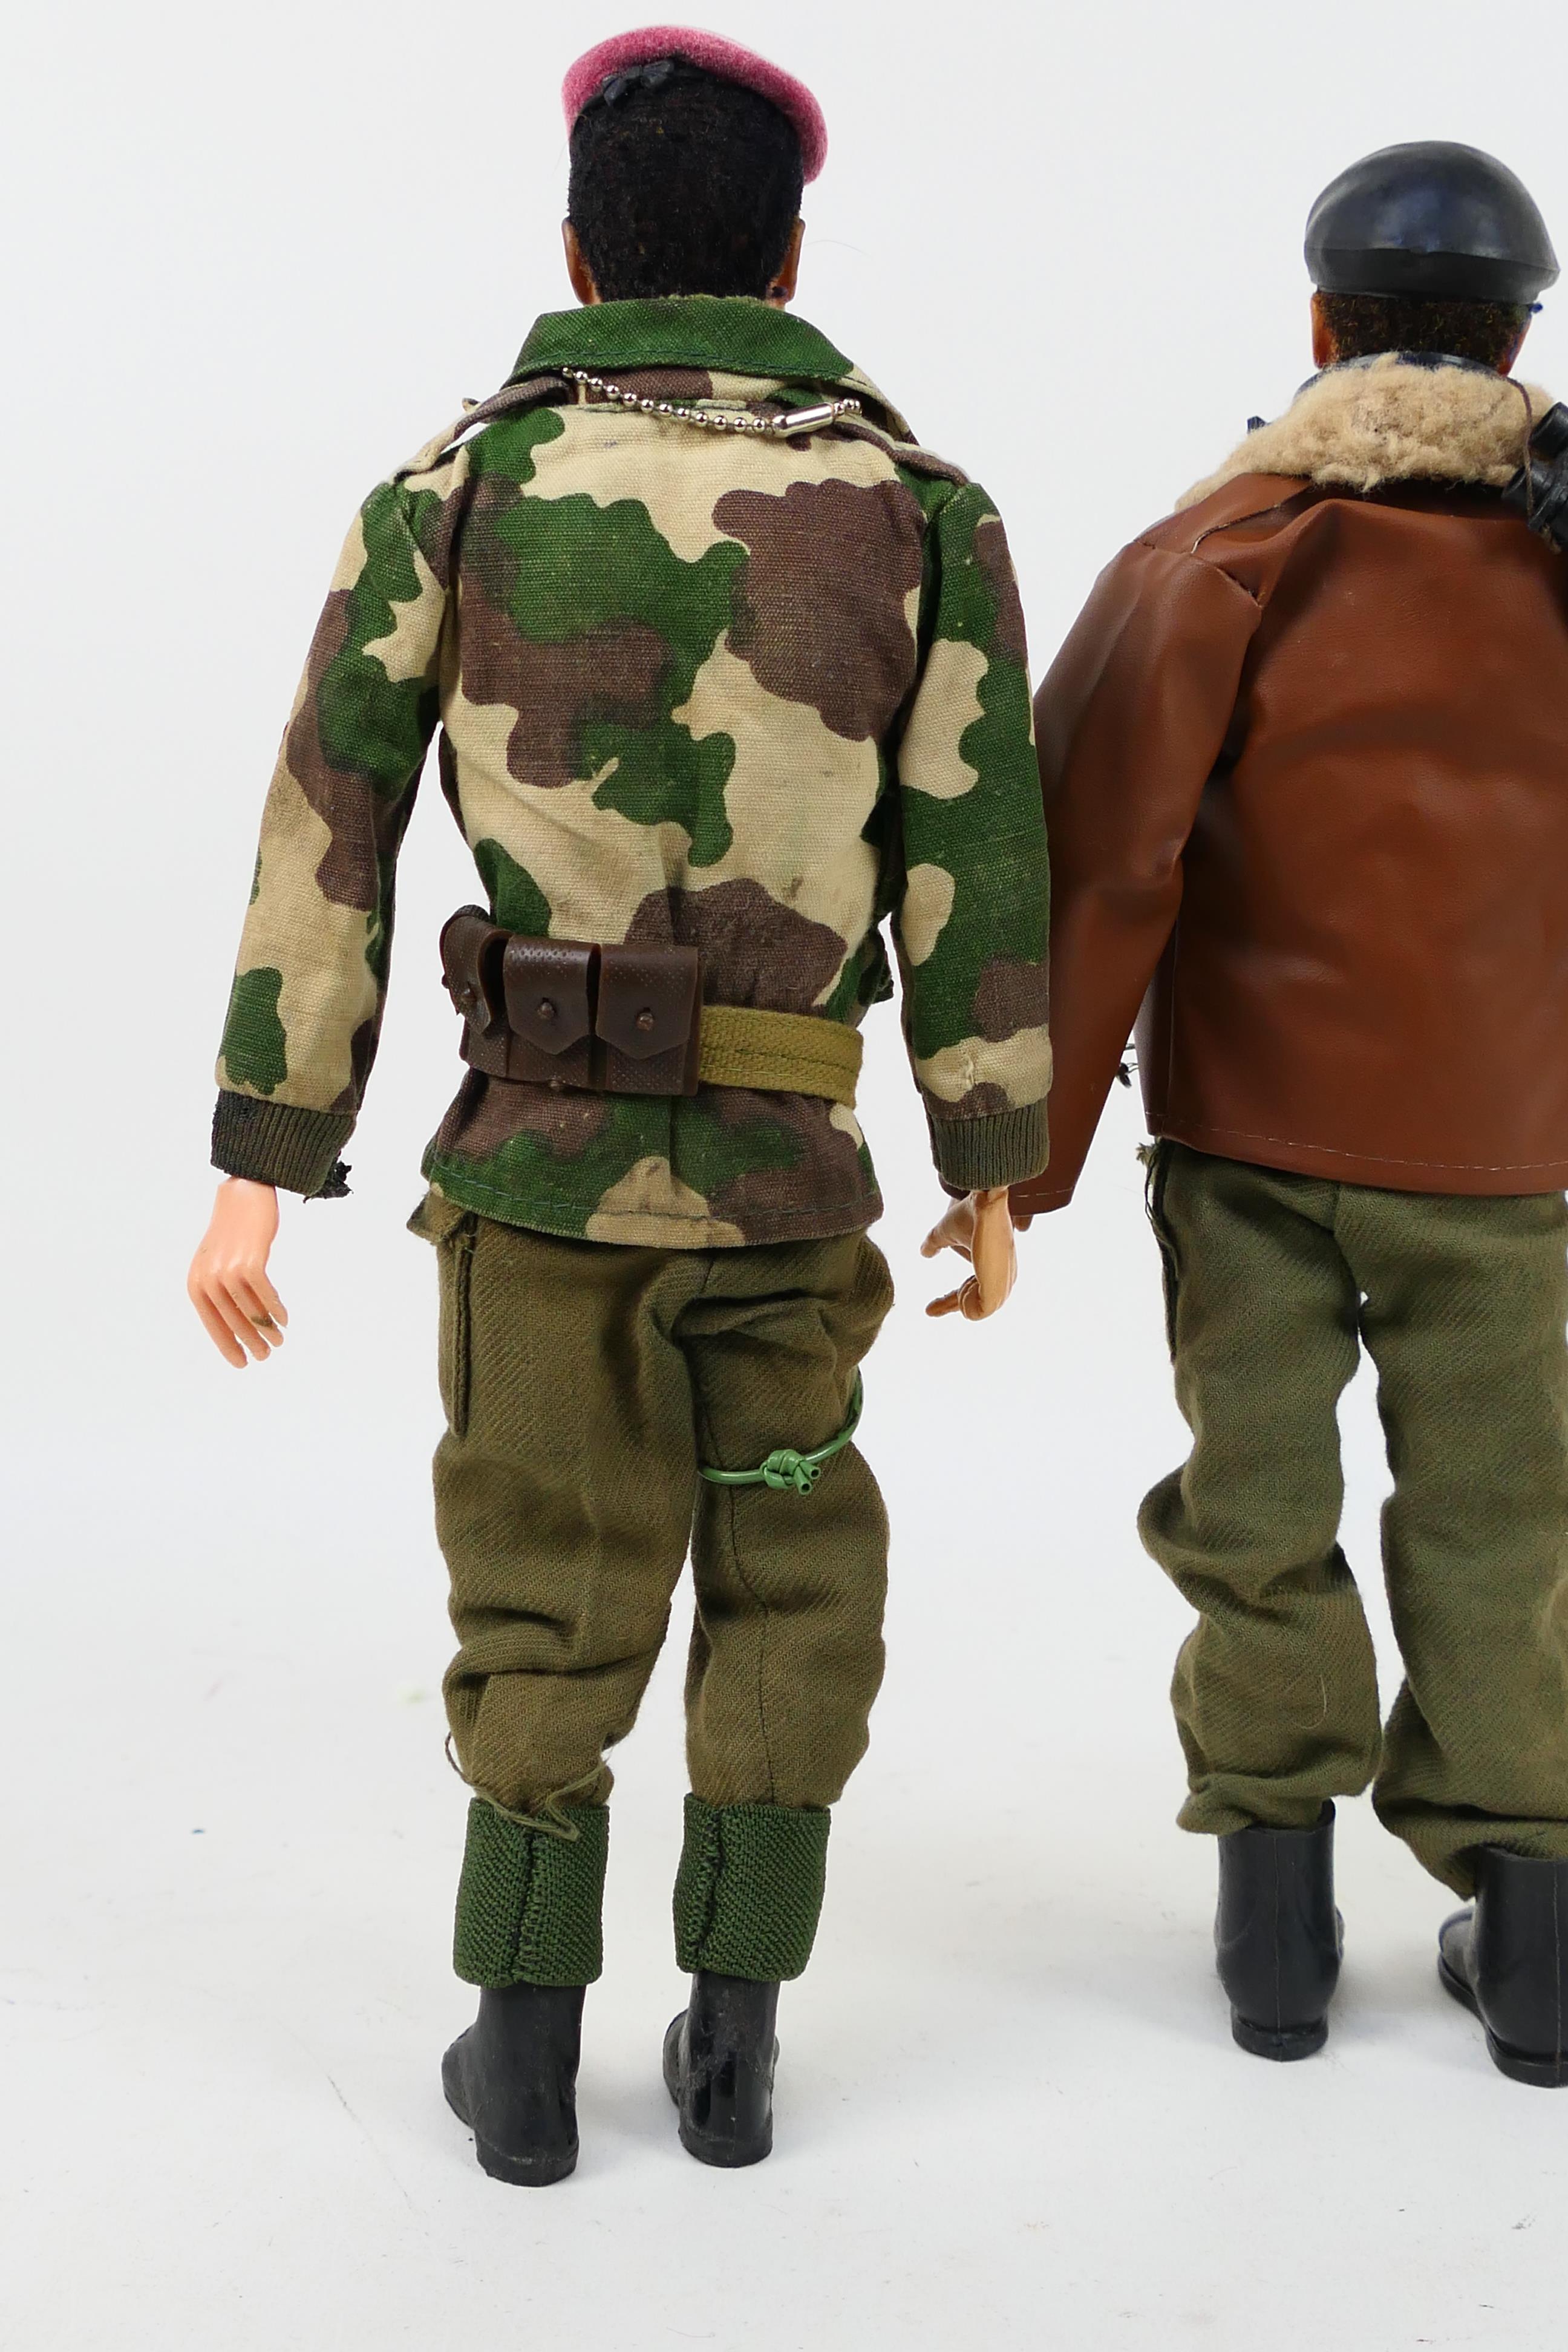 Palitoy - Action Man - Two unboxed vintage Action Man figures in Tank Commander and Parachute - Image 7 of 8